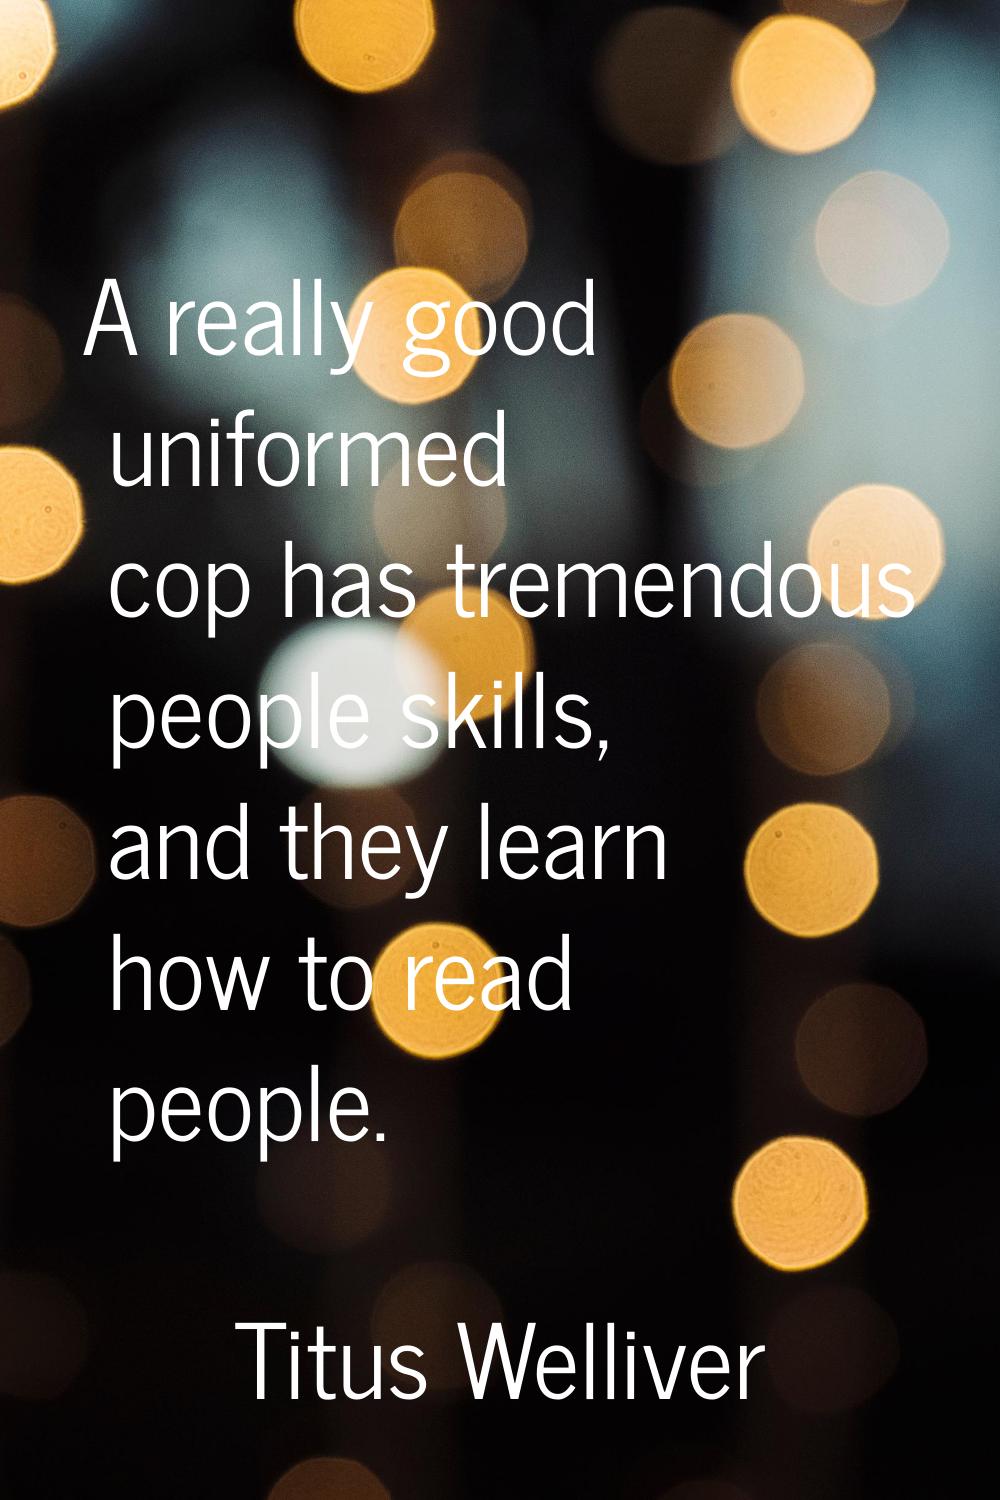 A really good uniformed cop has tremendous people skills, and they learn how to read people.